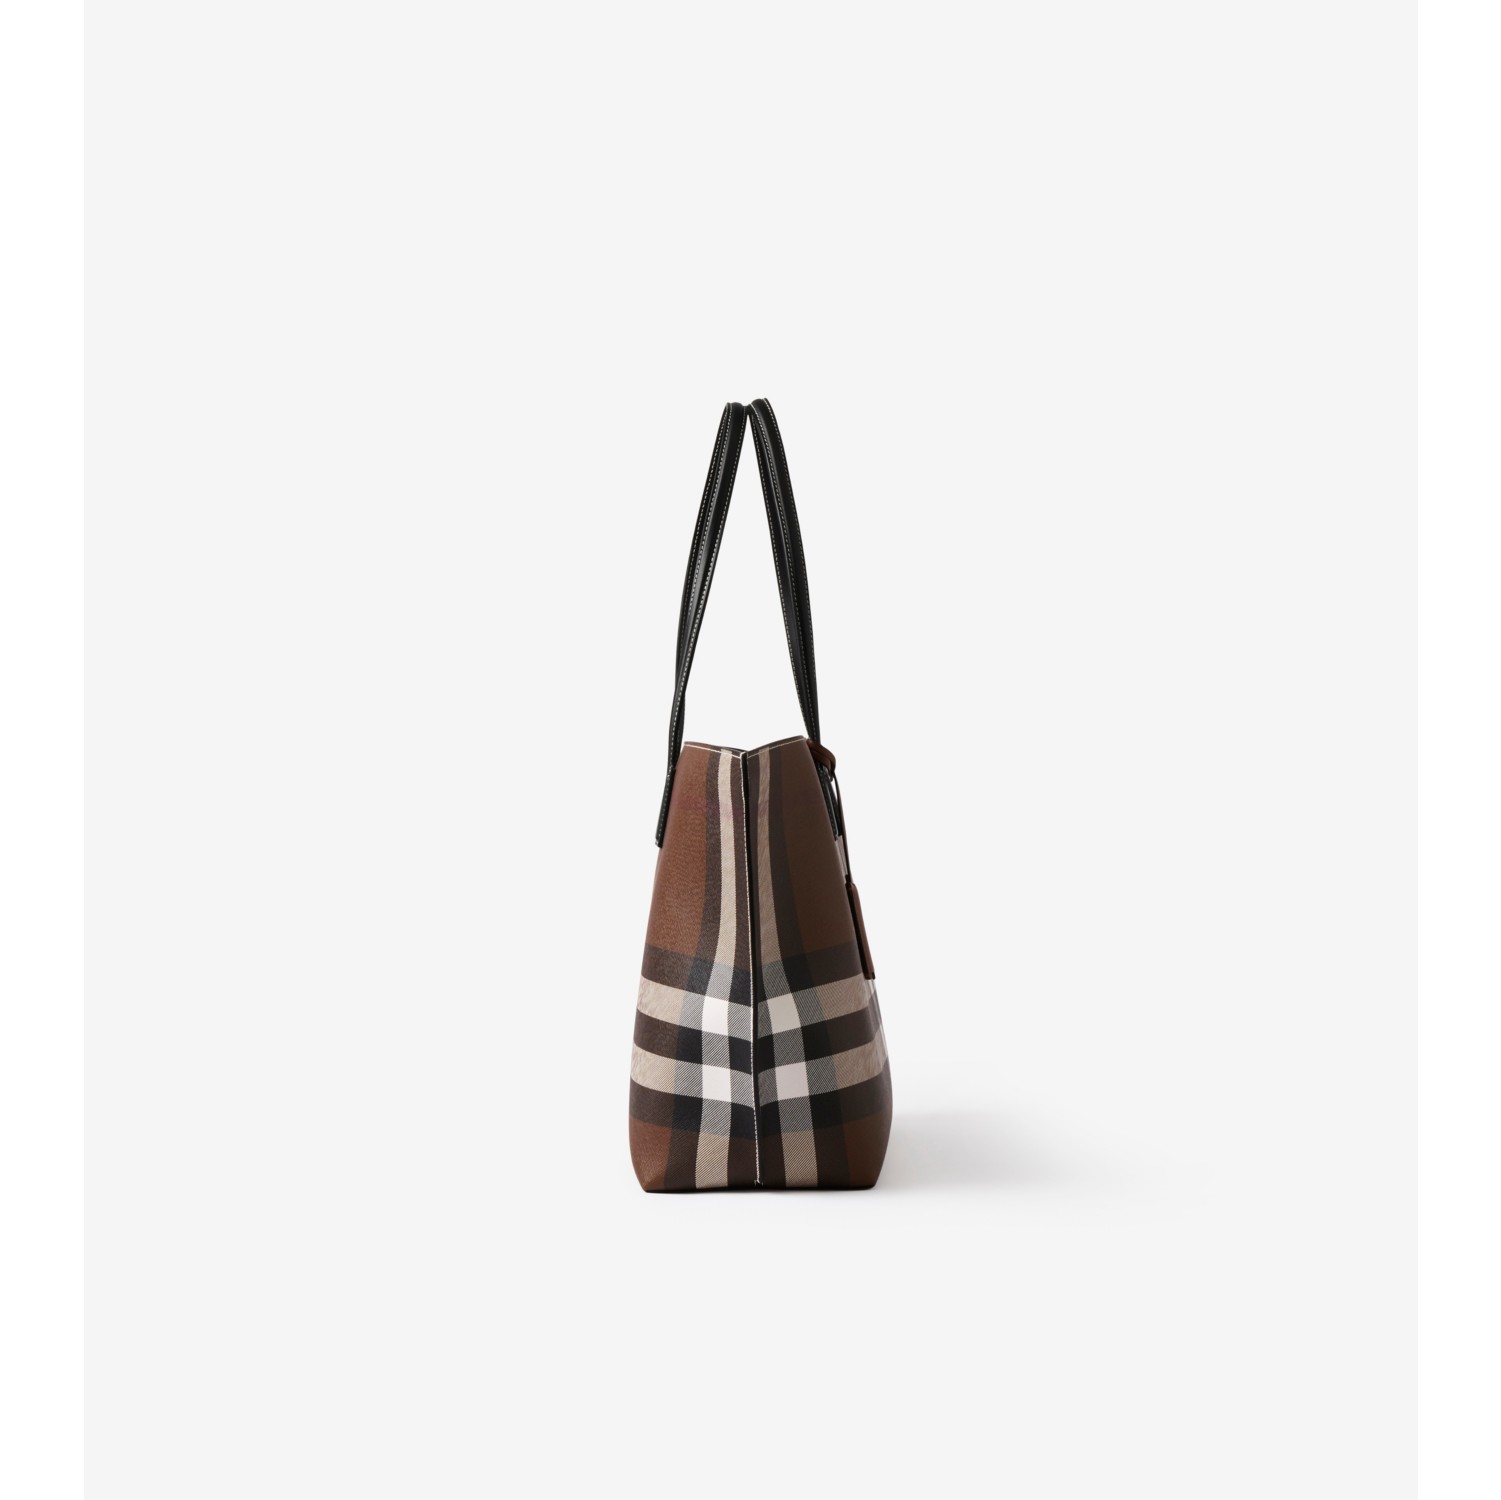 Burberry Reversible Tote Black Sale, SAVE 60% 